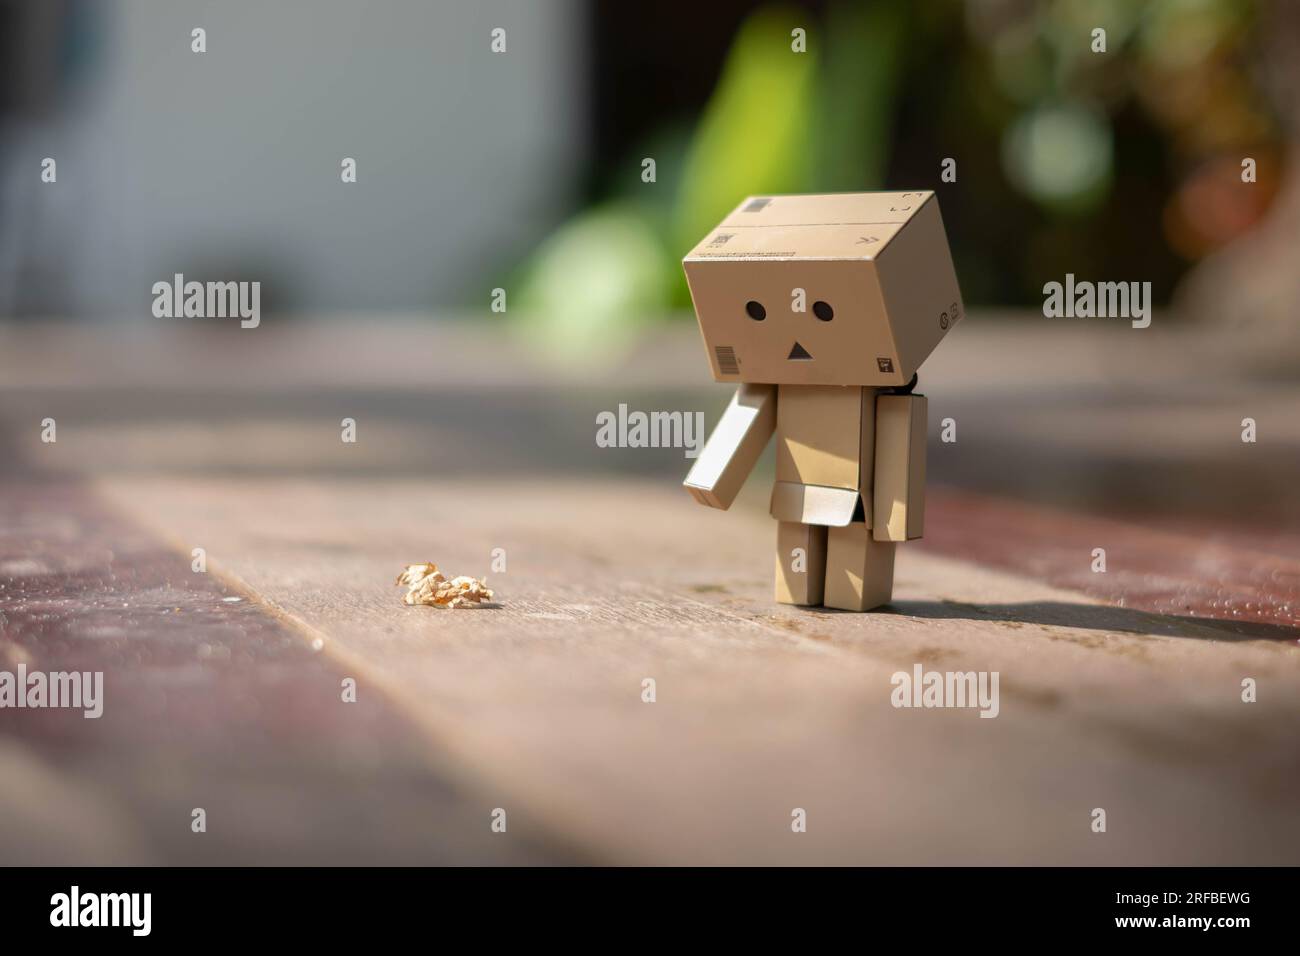 Small wooden toy robot danbo lonely isolated alone sad character, wood floor outdoor cartoon box anime happy art concept nature summer, brown doll cut Stock Photo